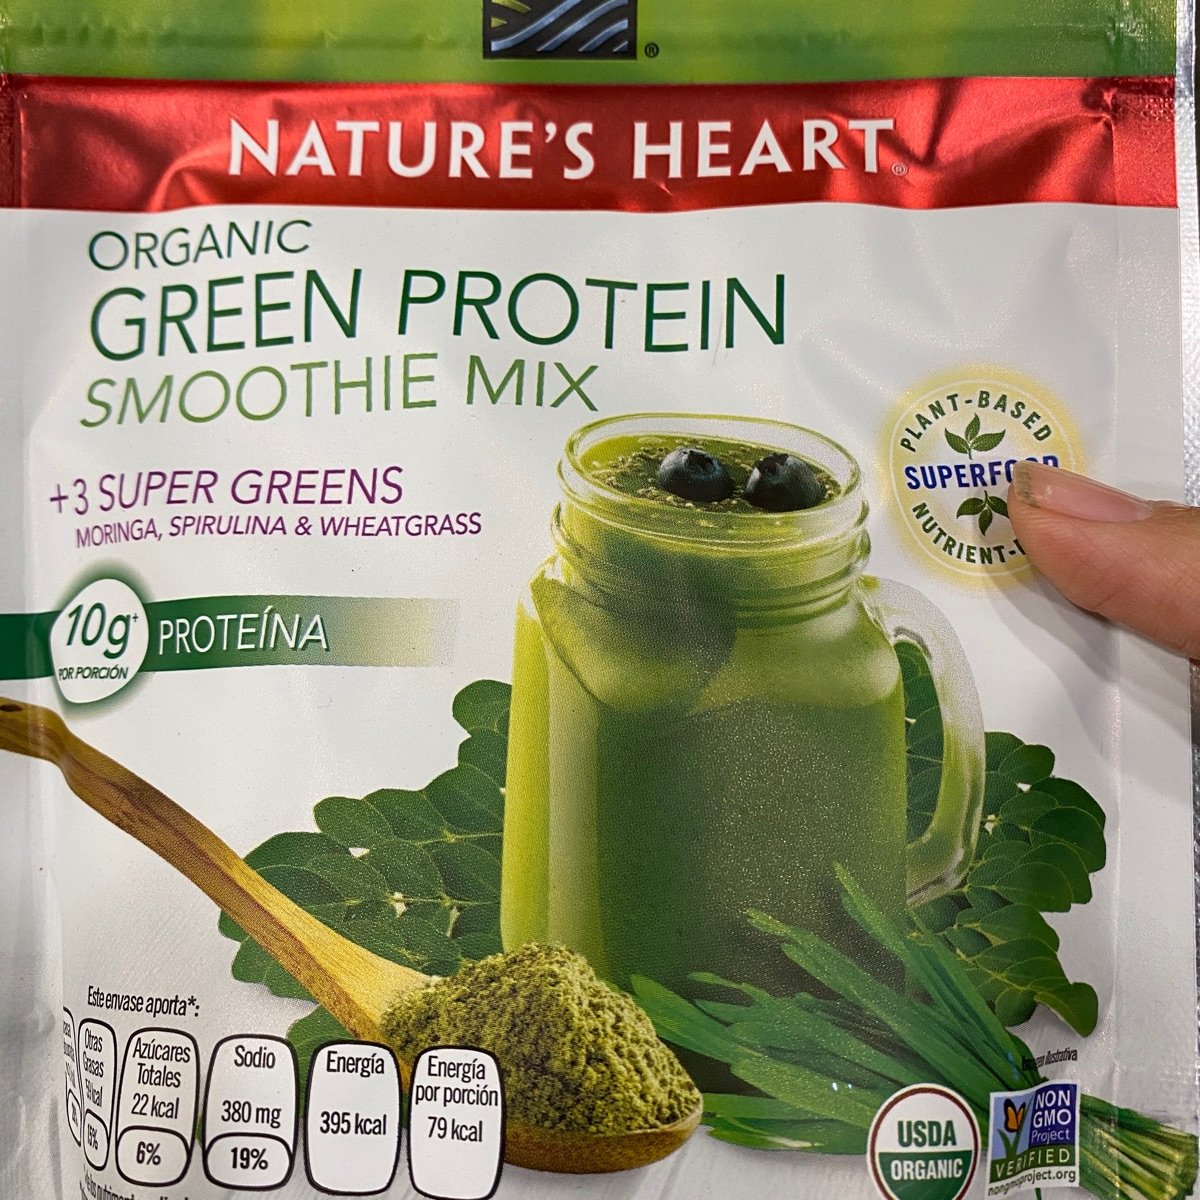 Nature's Heart Green Protein Smoothie Mix Reviews